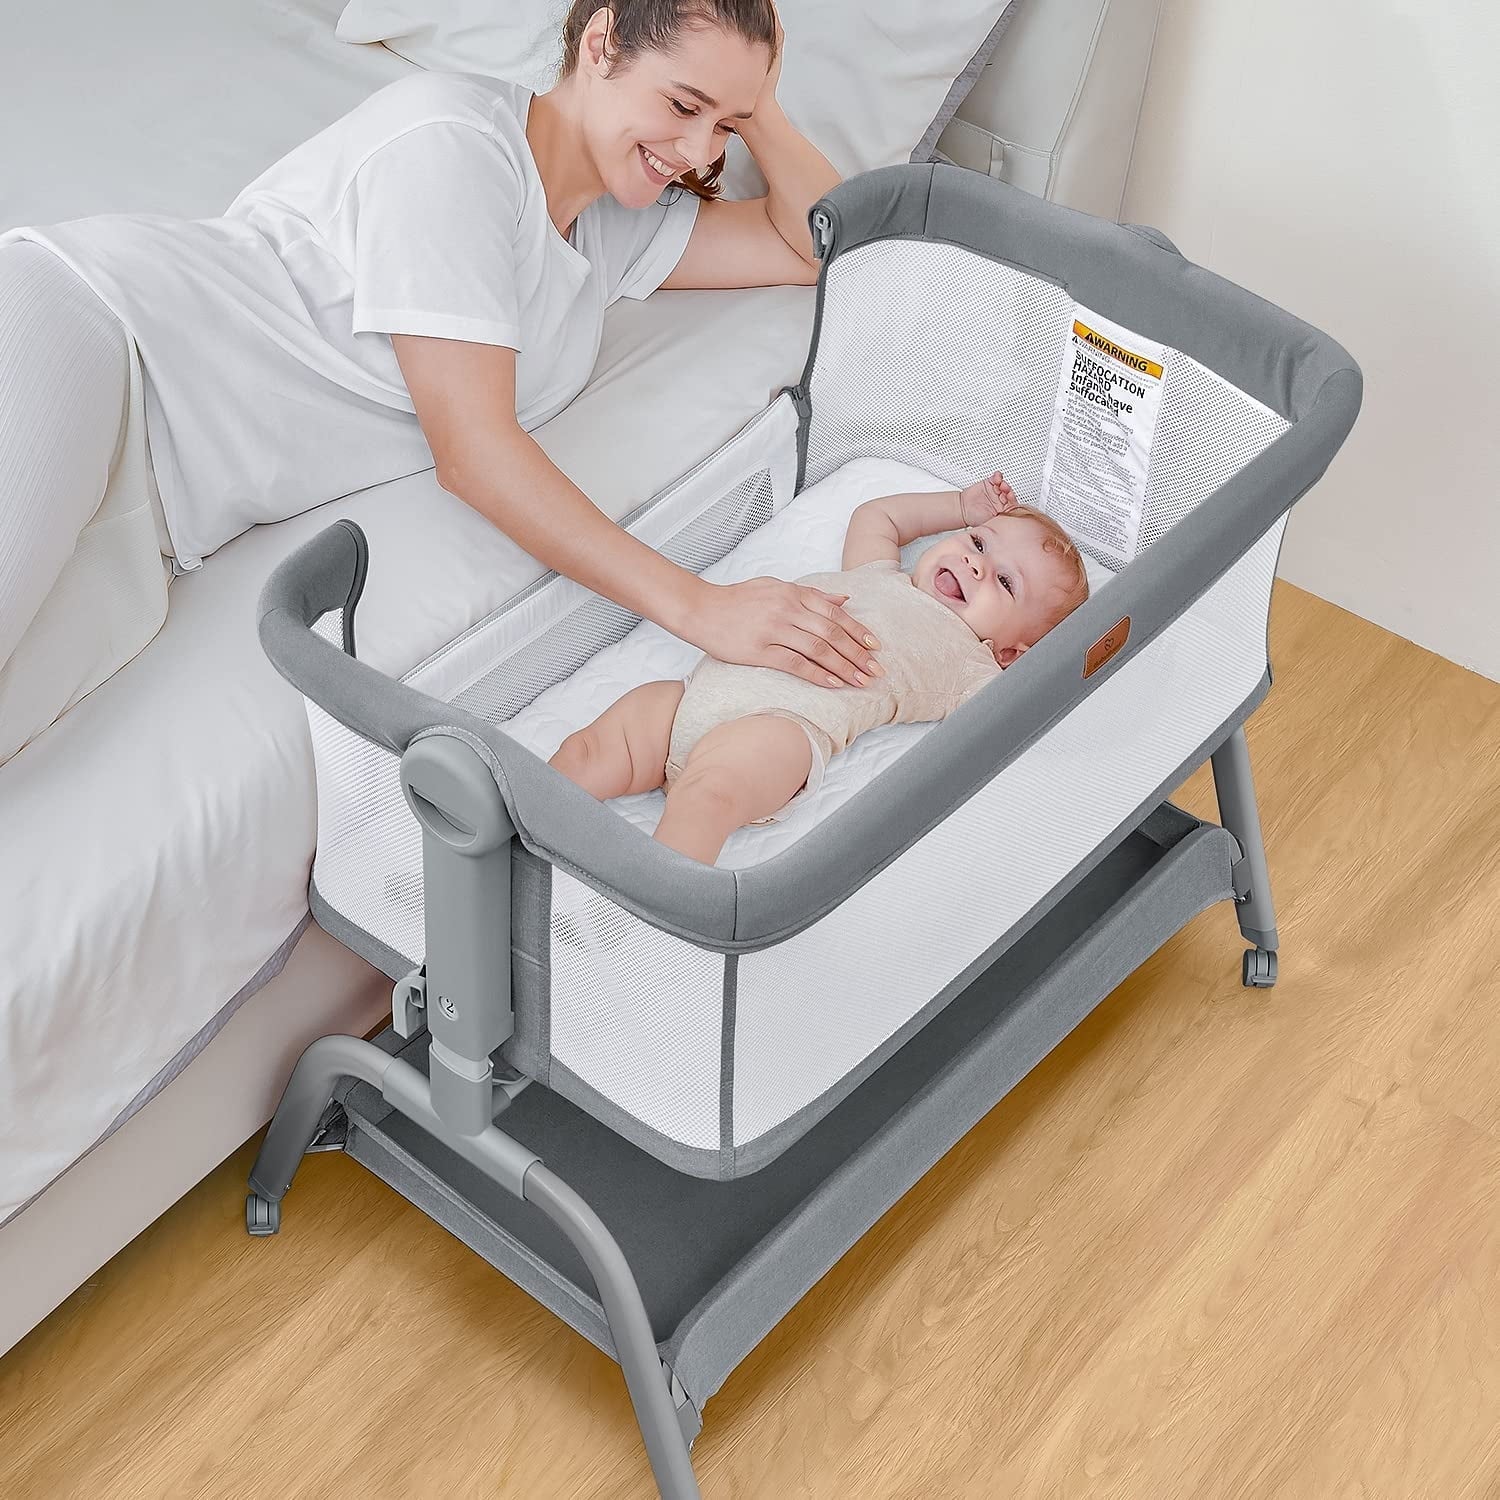 Baby Bassinet, 3 in 1 Bassinet Bedside Sleeper with Washable Soft Mattress and Sheet, 6 Height Adjustable Easy Folding Bedside Crib, 4-Sided Mesh Bedside Bassinet for Baby,Gray